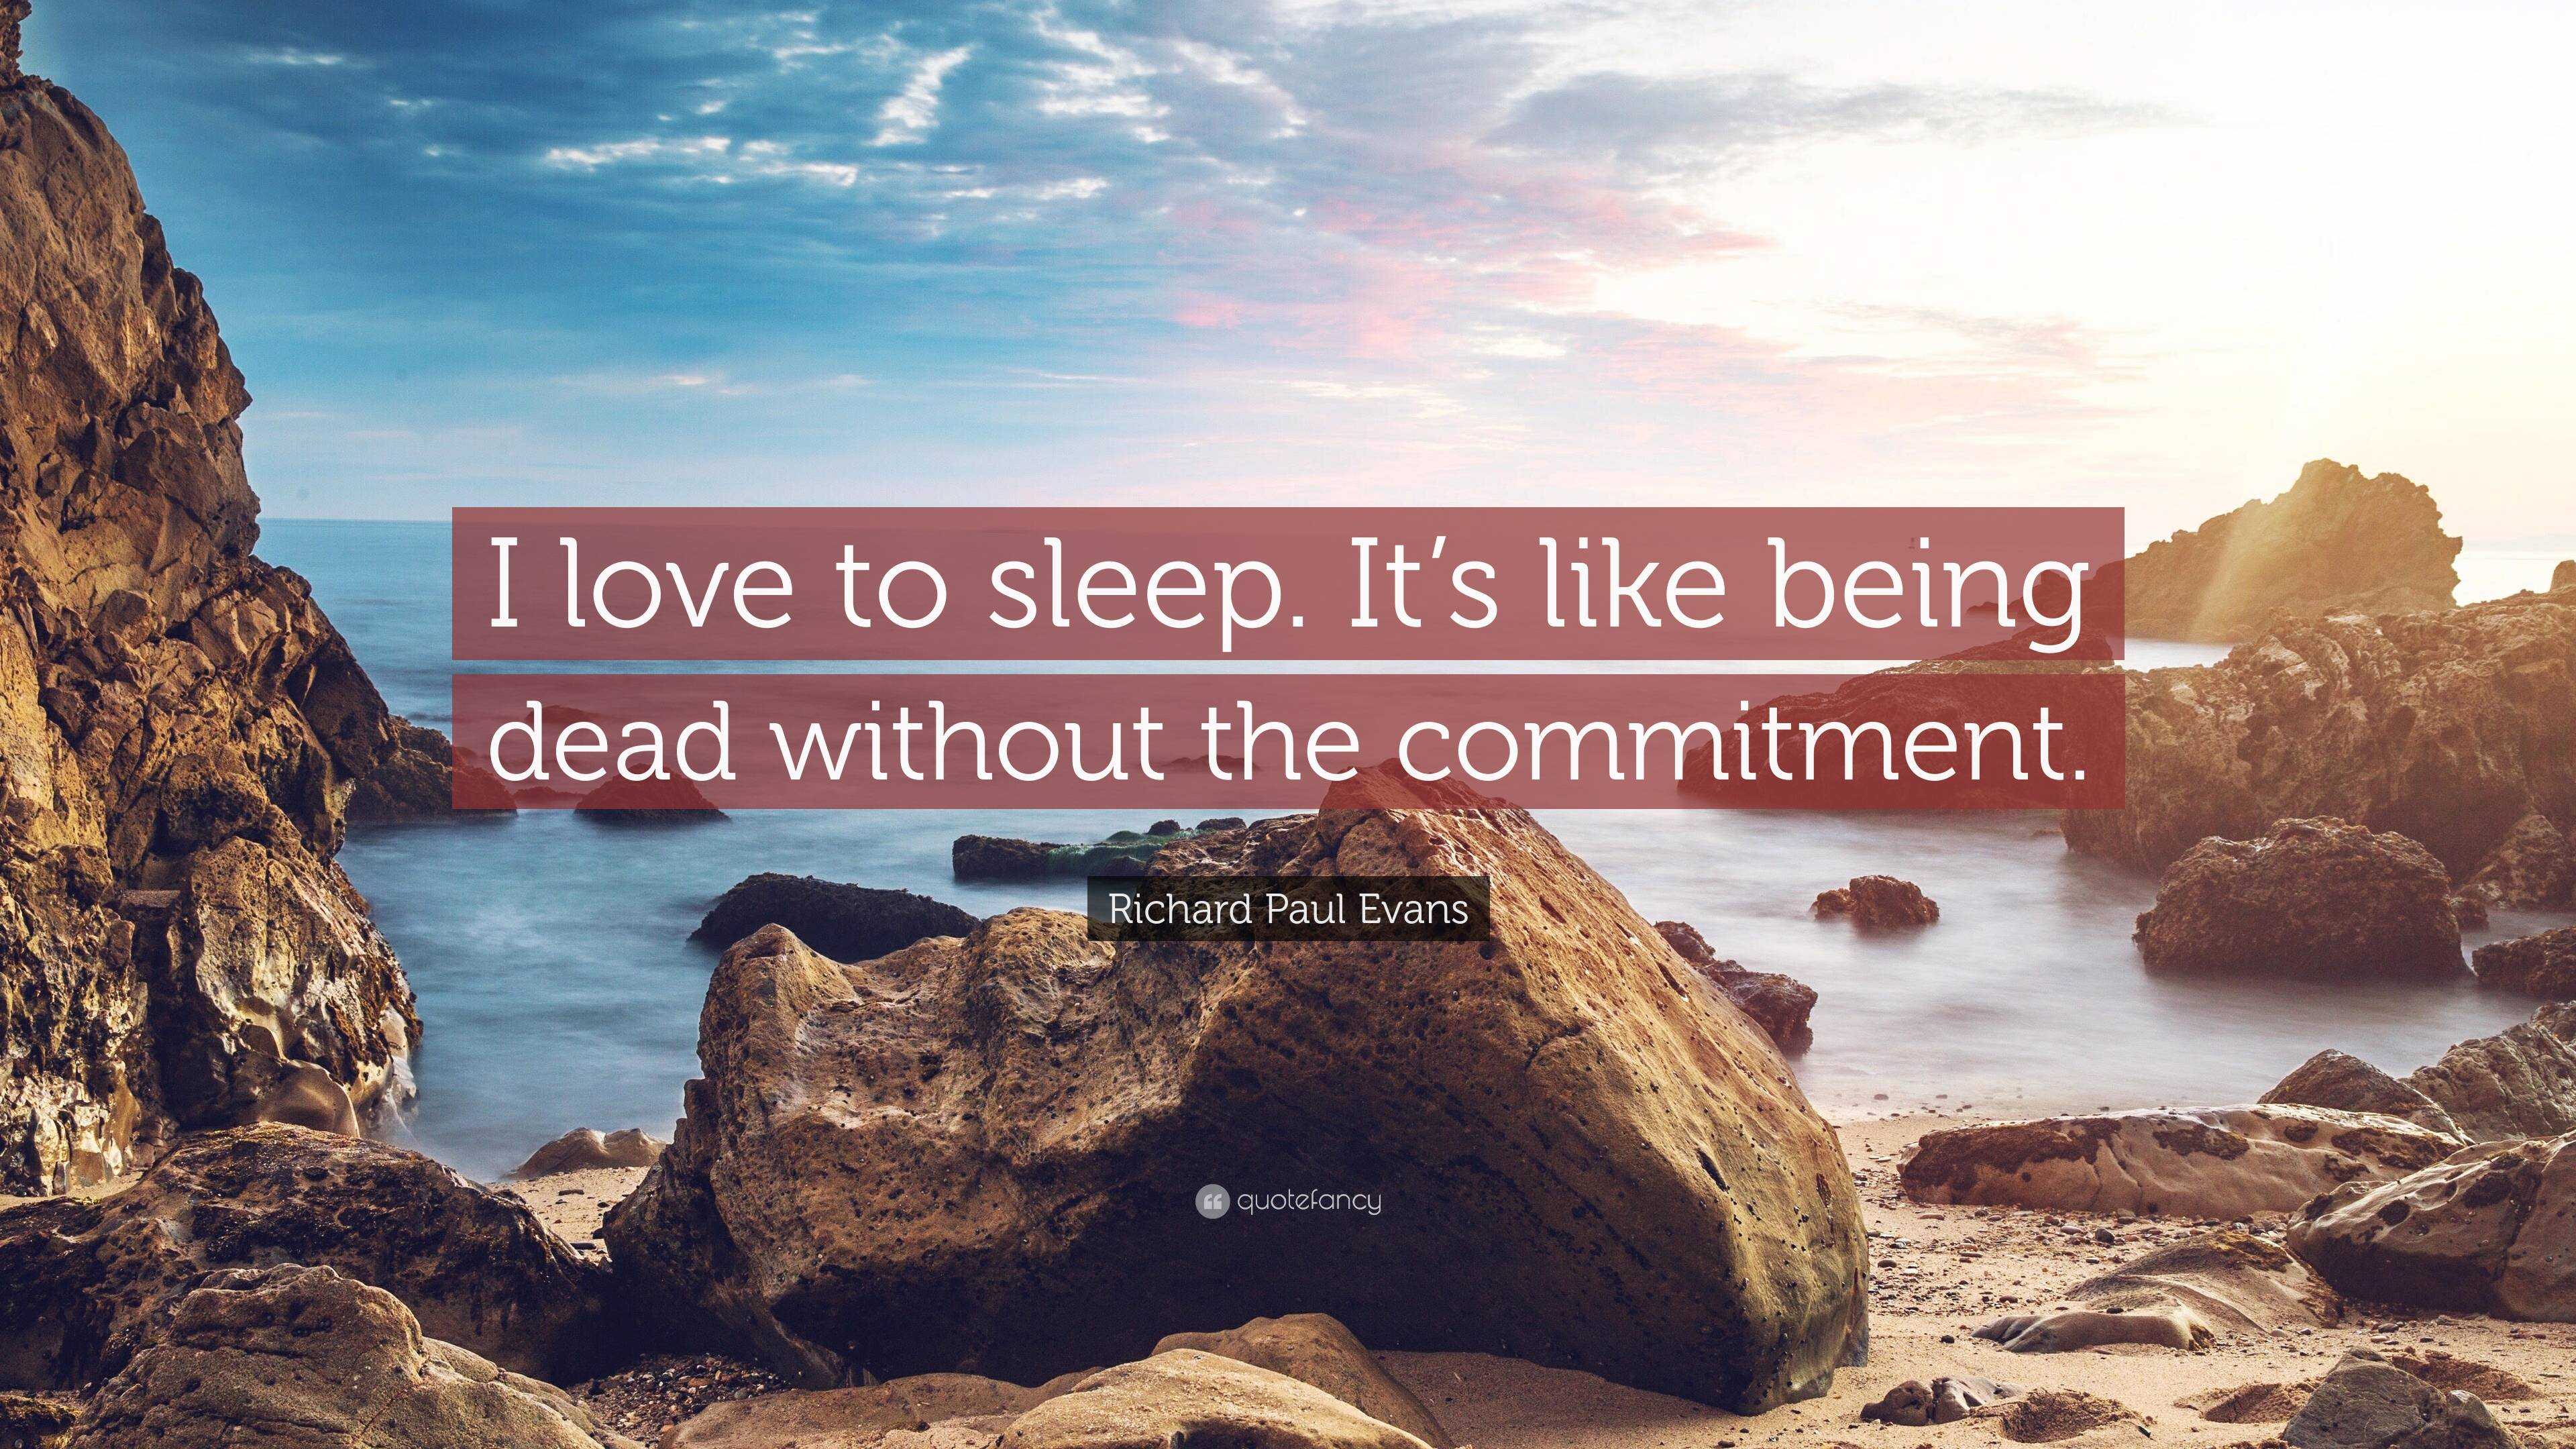 Richard Paul Evans Quote: “I love to sleep. It's like being dead without  the commitment.”